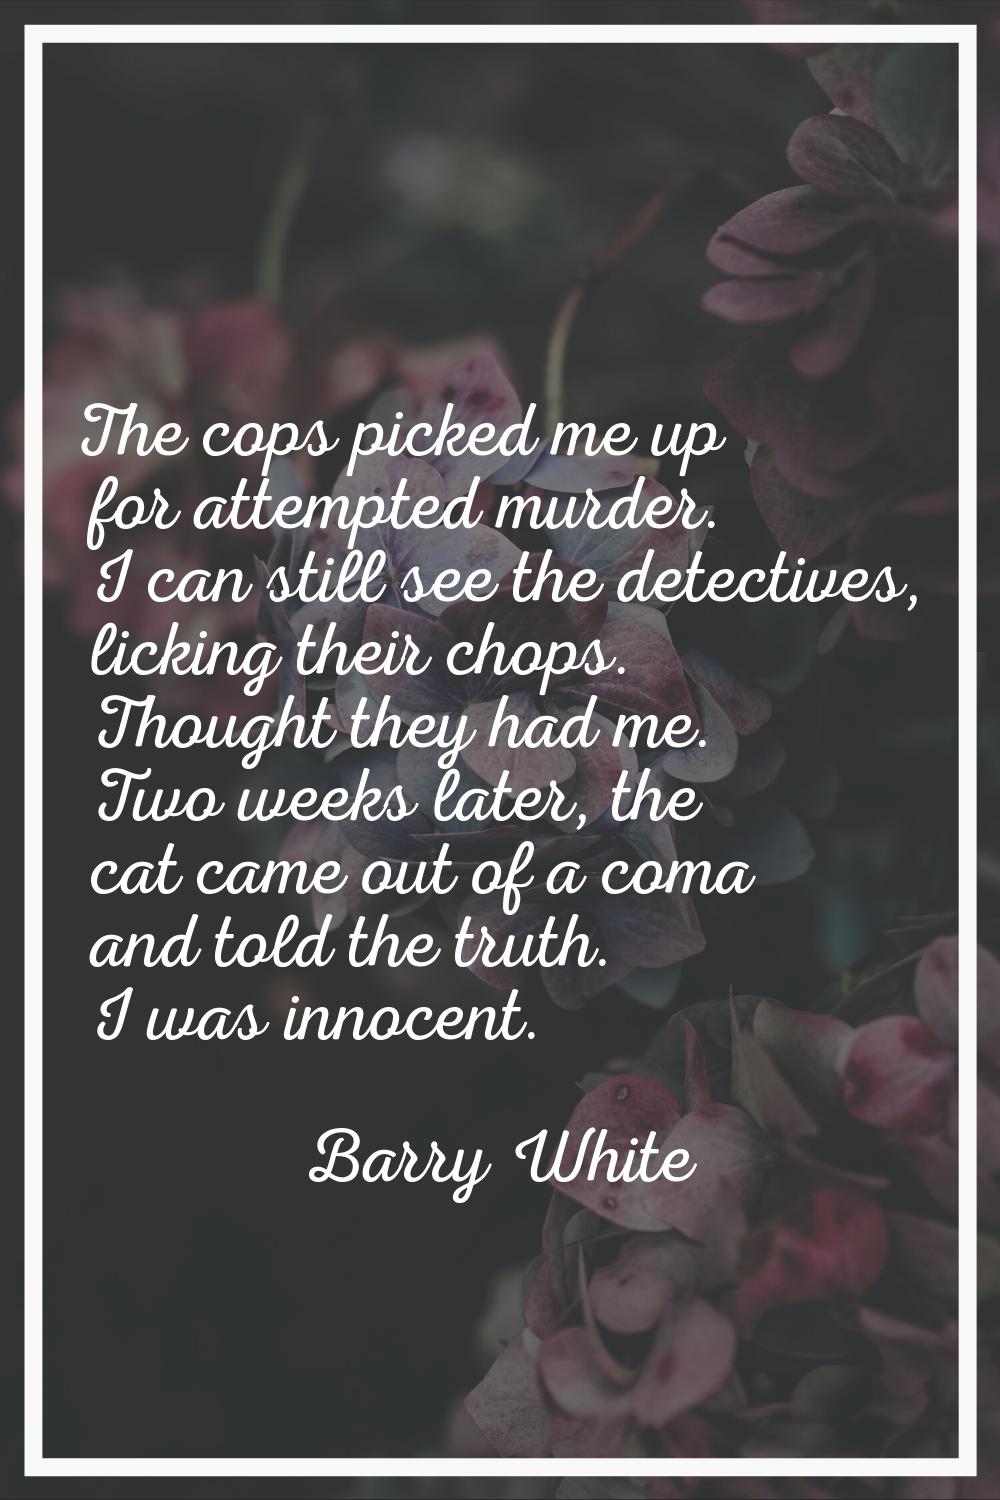 The cops picked me up for attempted murder. I can still see the detectives, licking their chops. Th